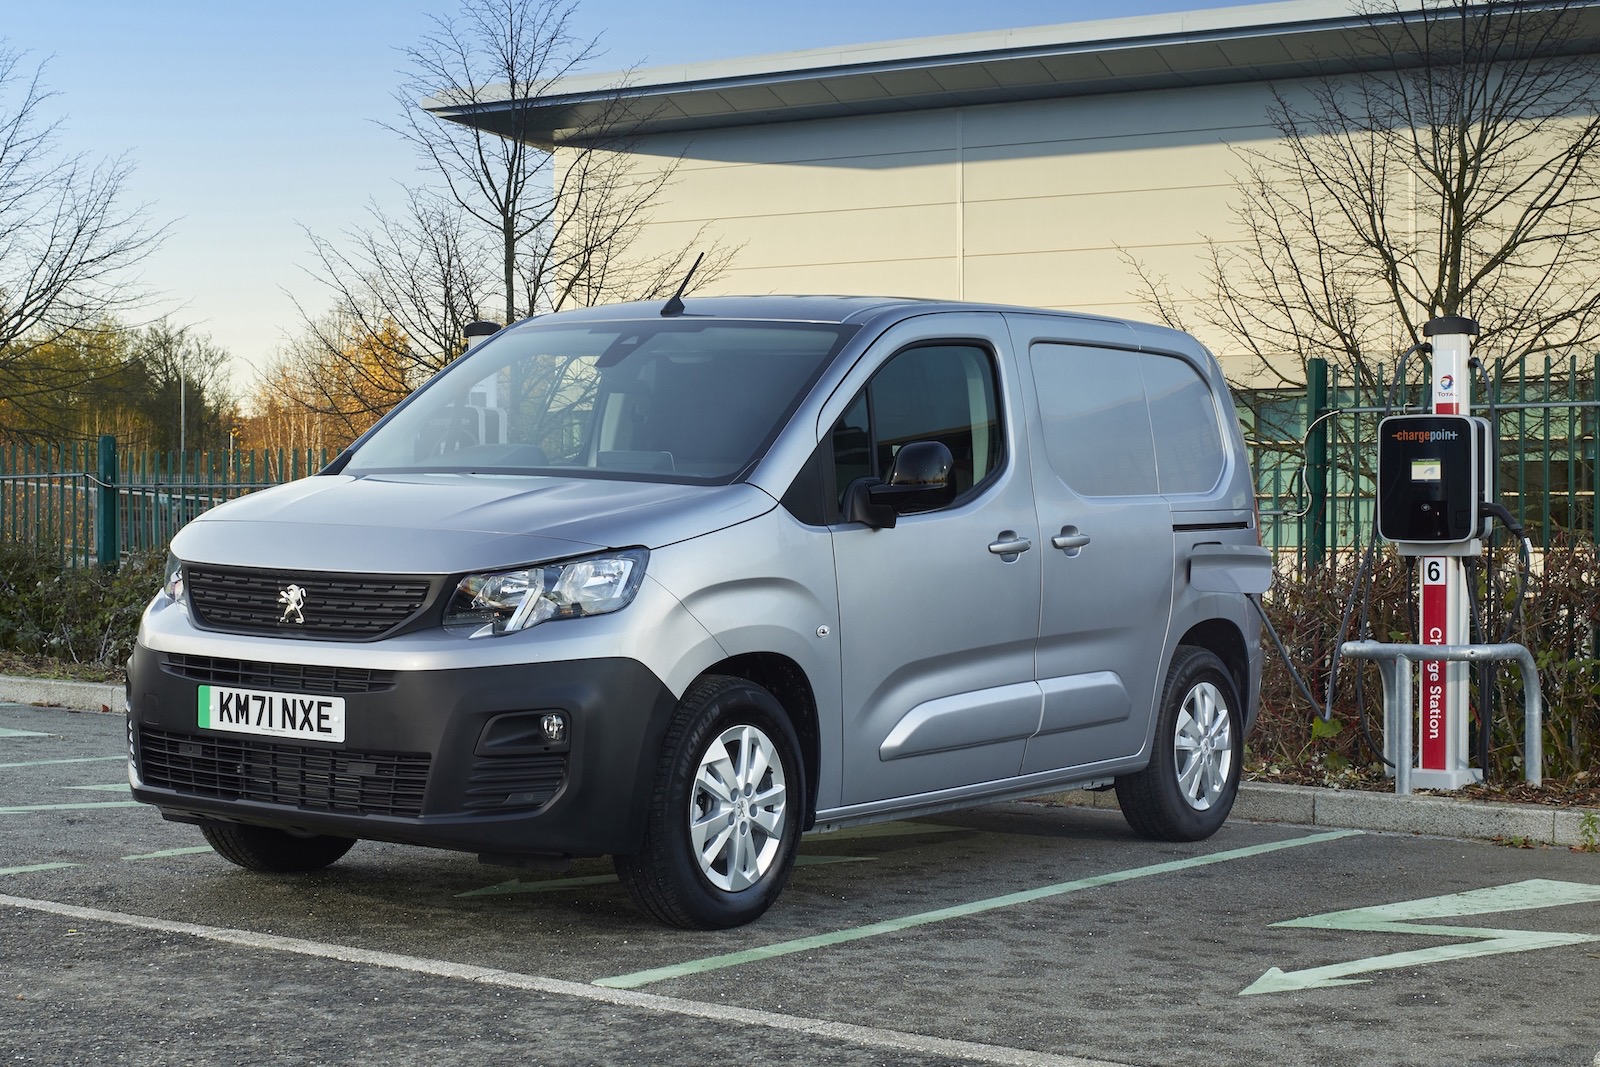 Peugeot e-Parter electric van on sale in Australia from $59,990